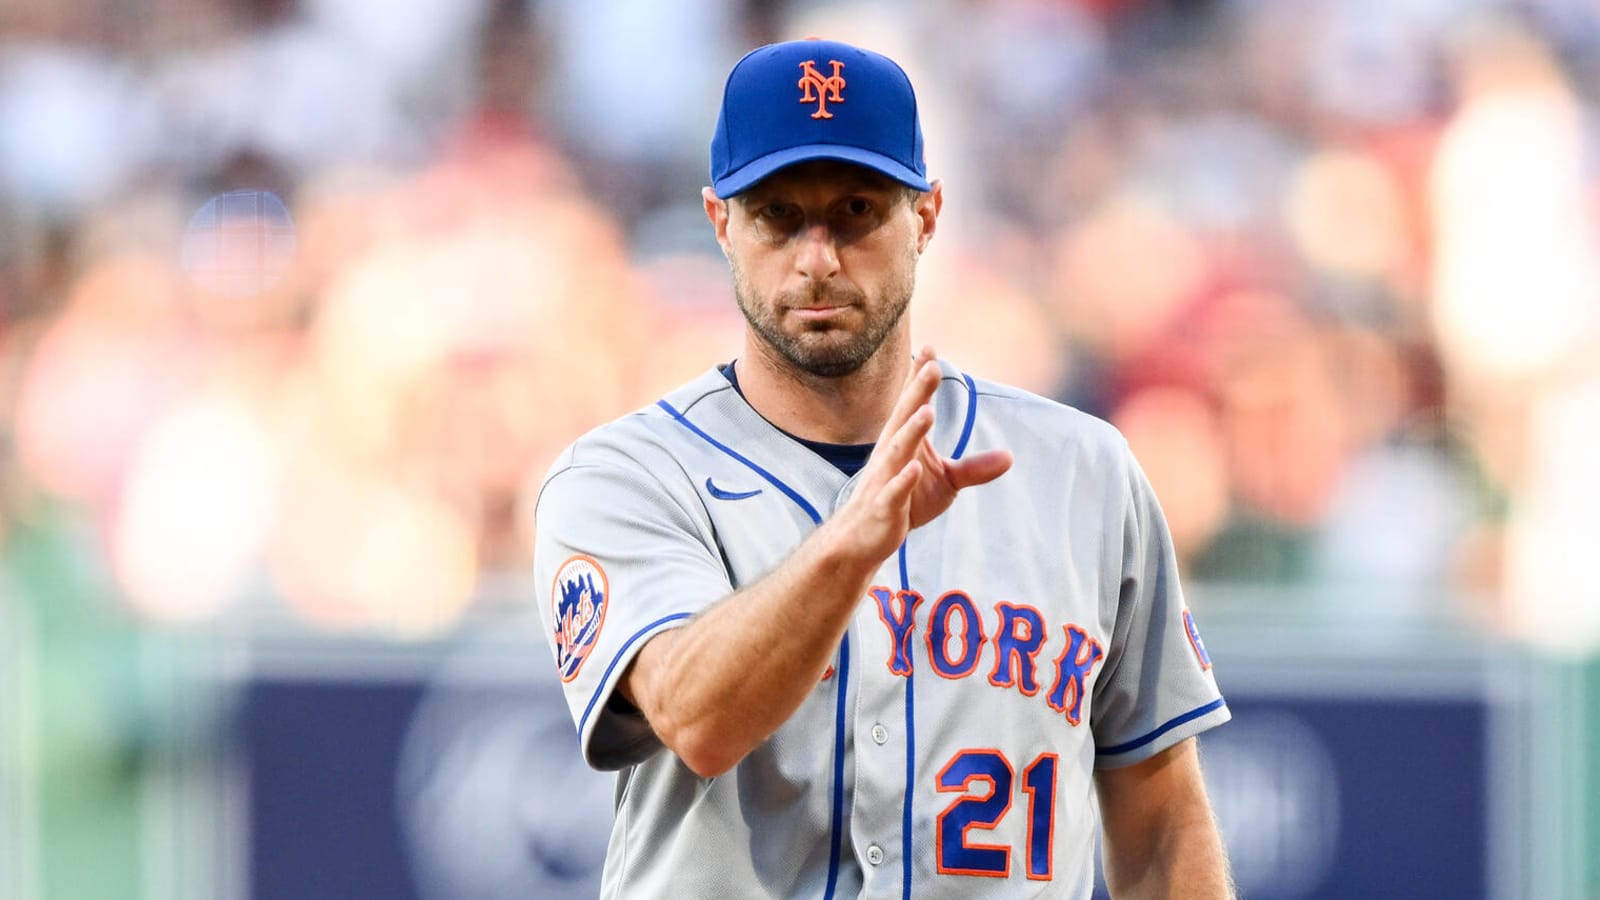 When to expect Mets aces Jacob deGrom and Max Scherzer to return